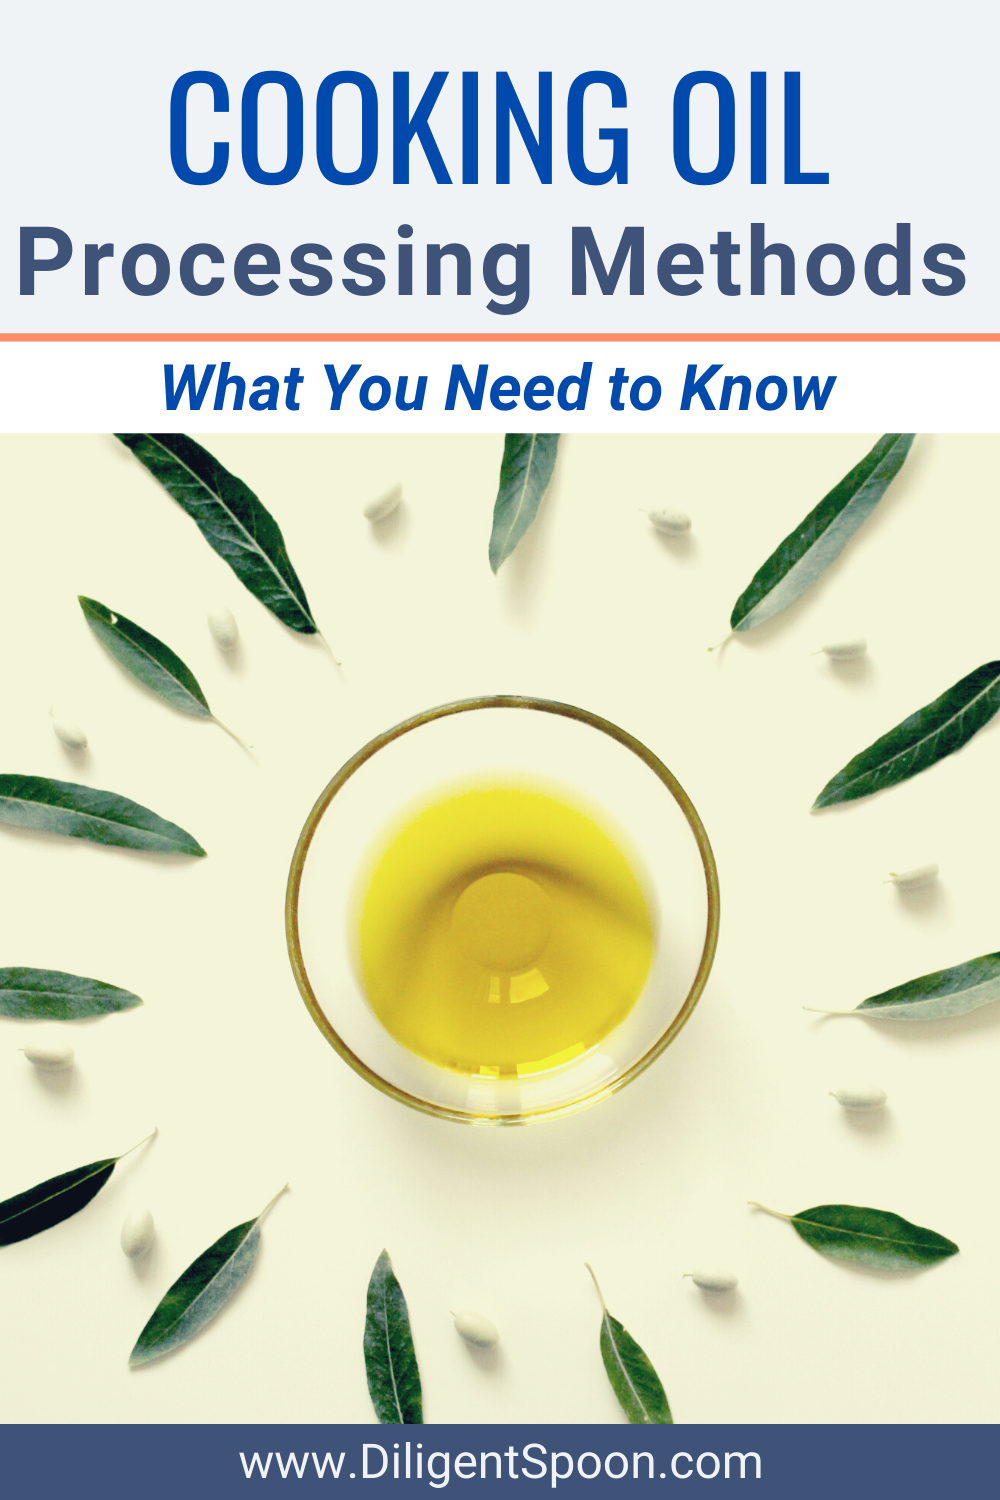 Guide to Cooking Oil Processing Methods